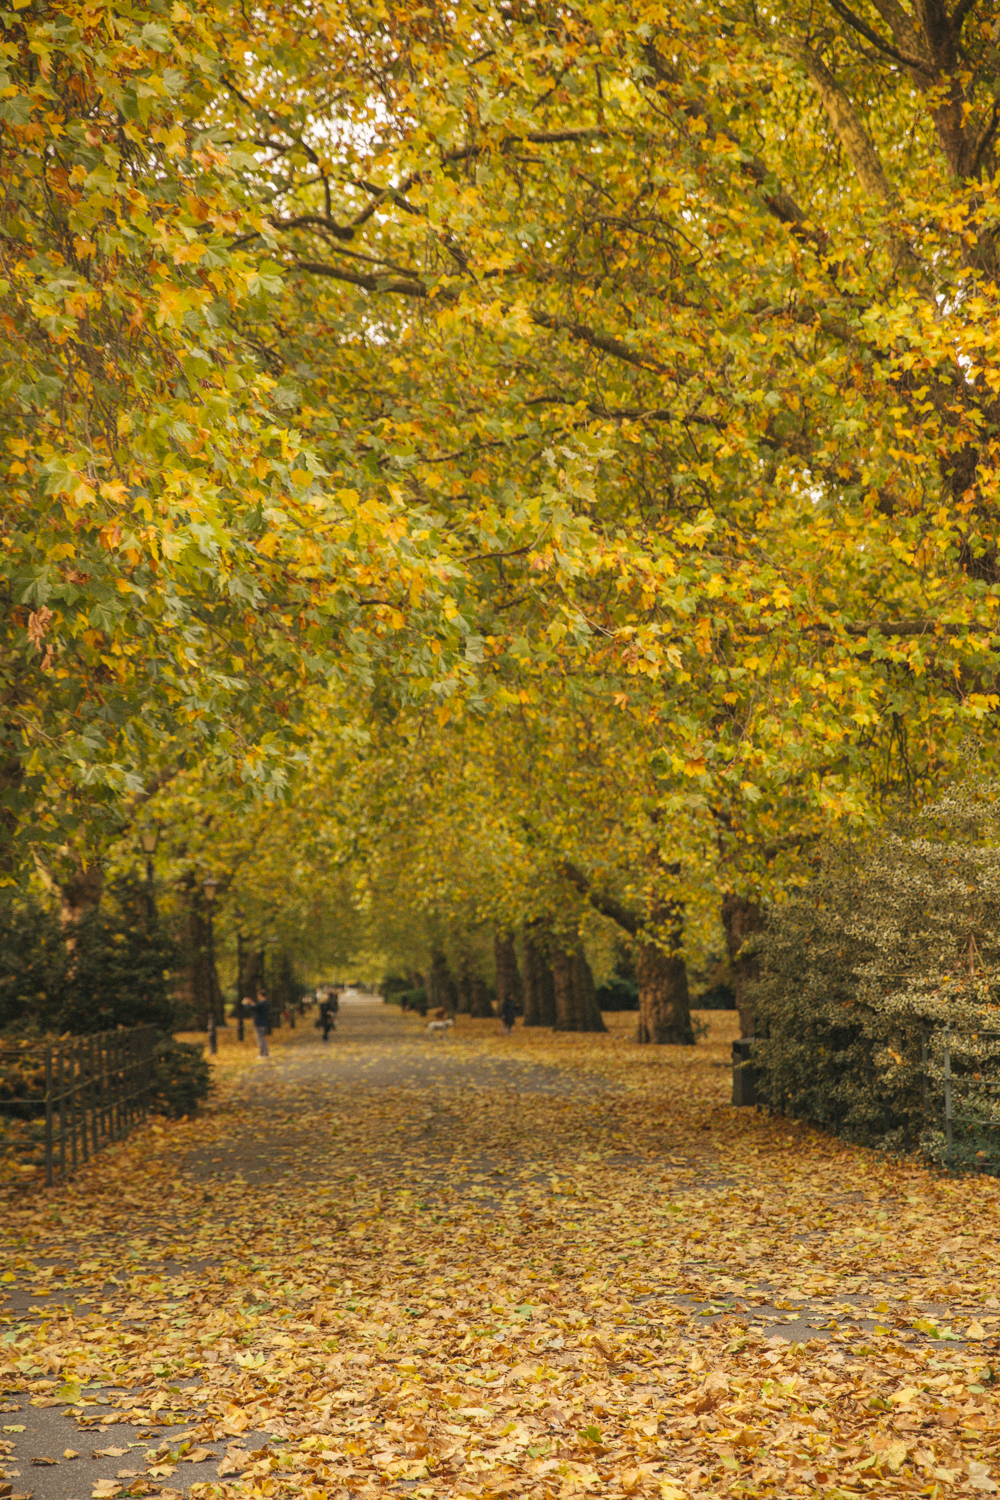 Autumn Mornings, South of The River - The Londoner